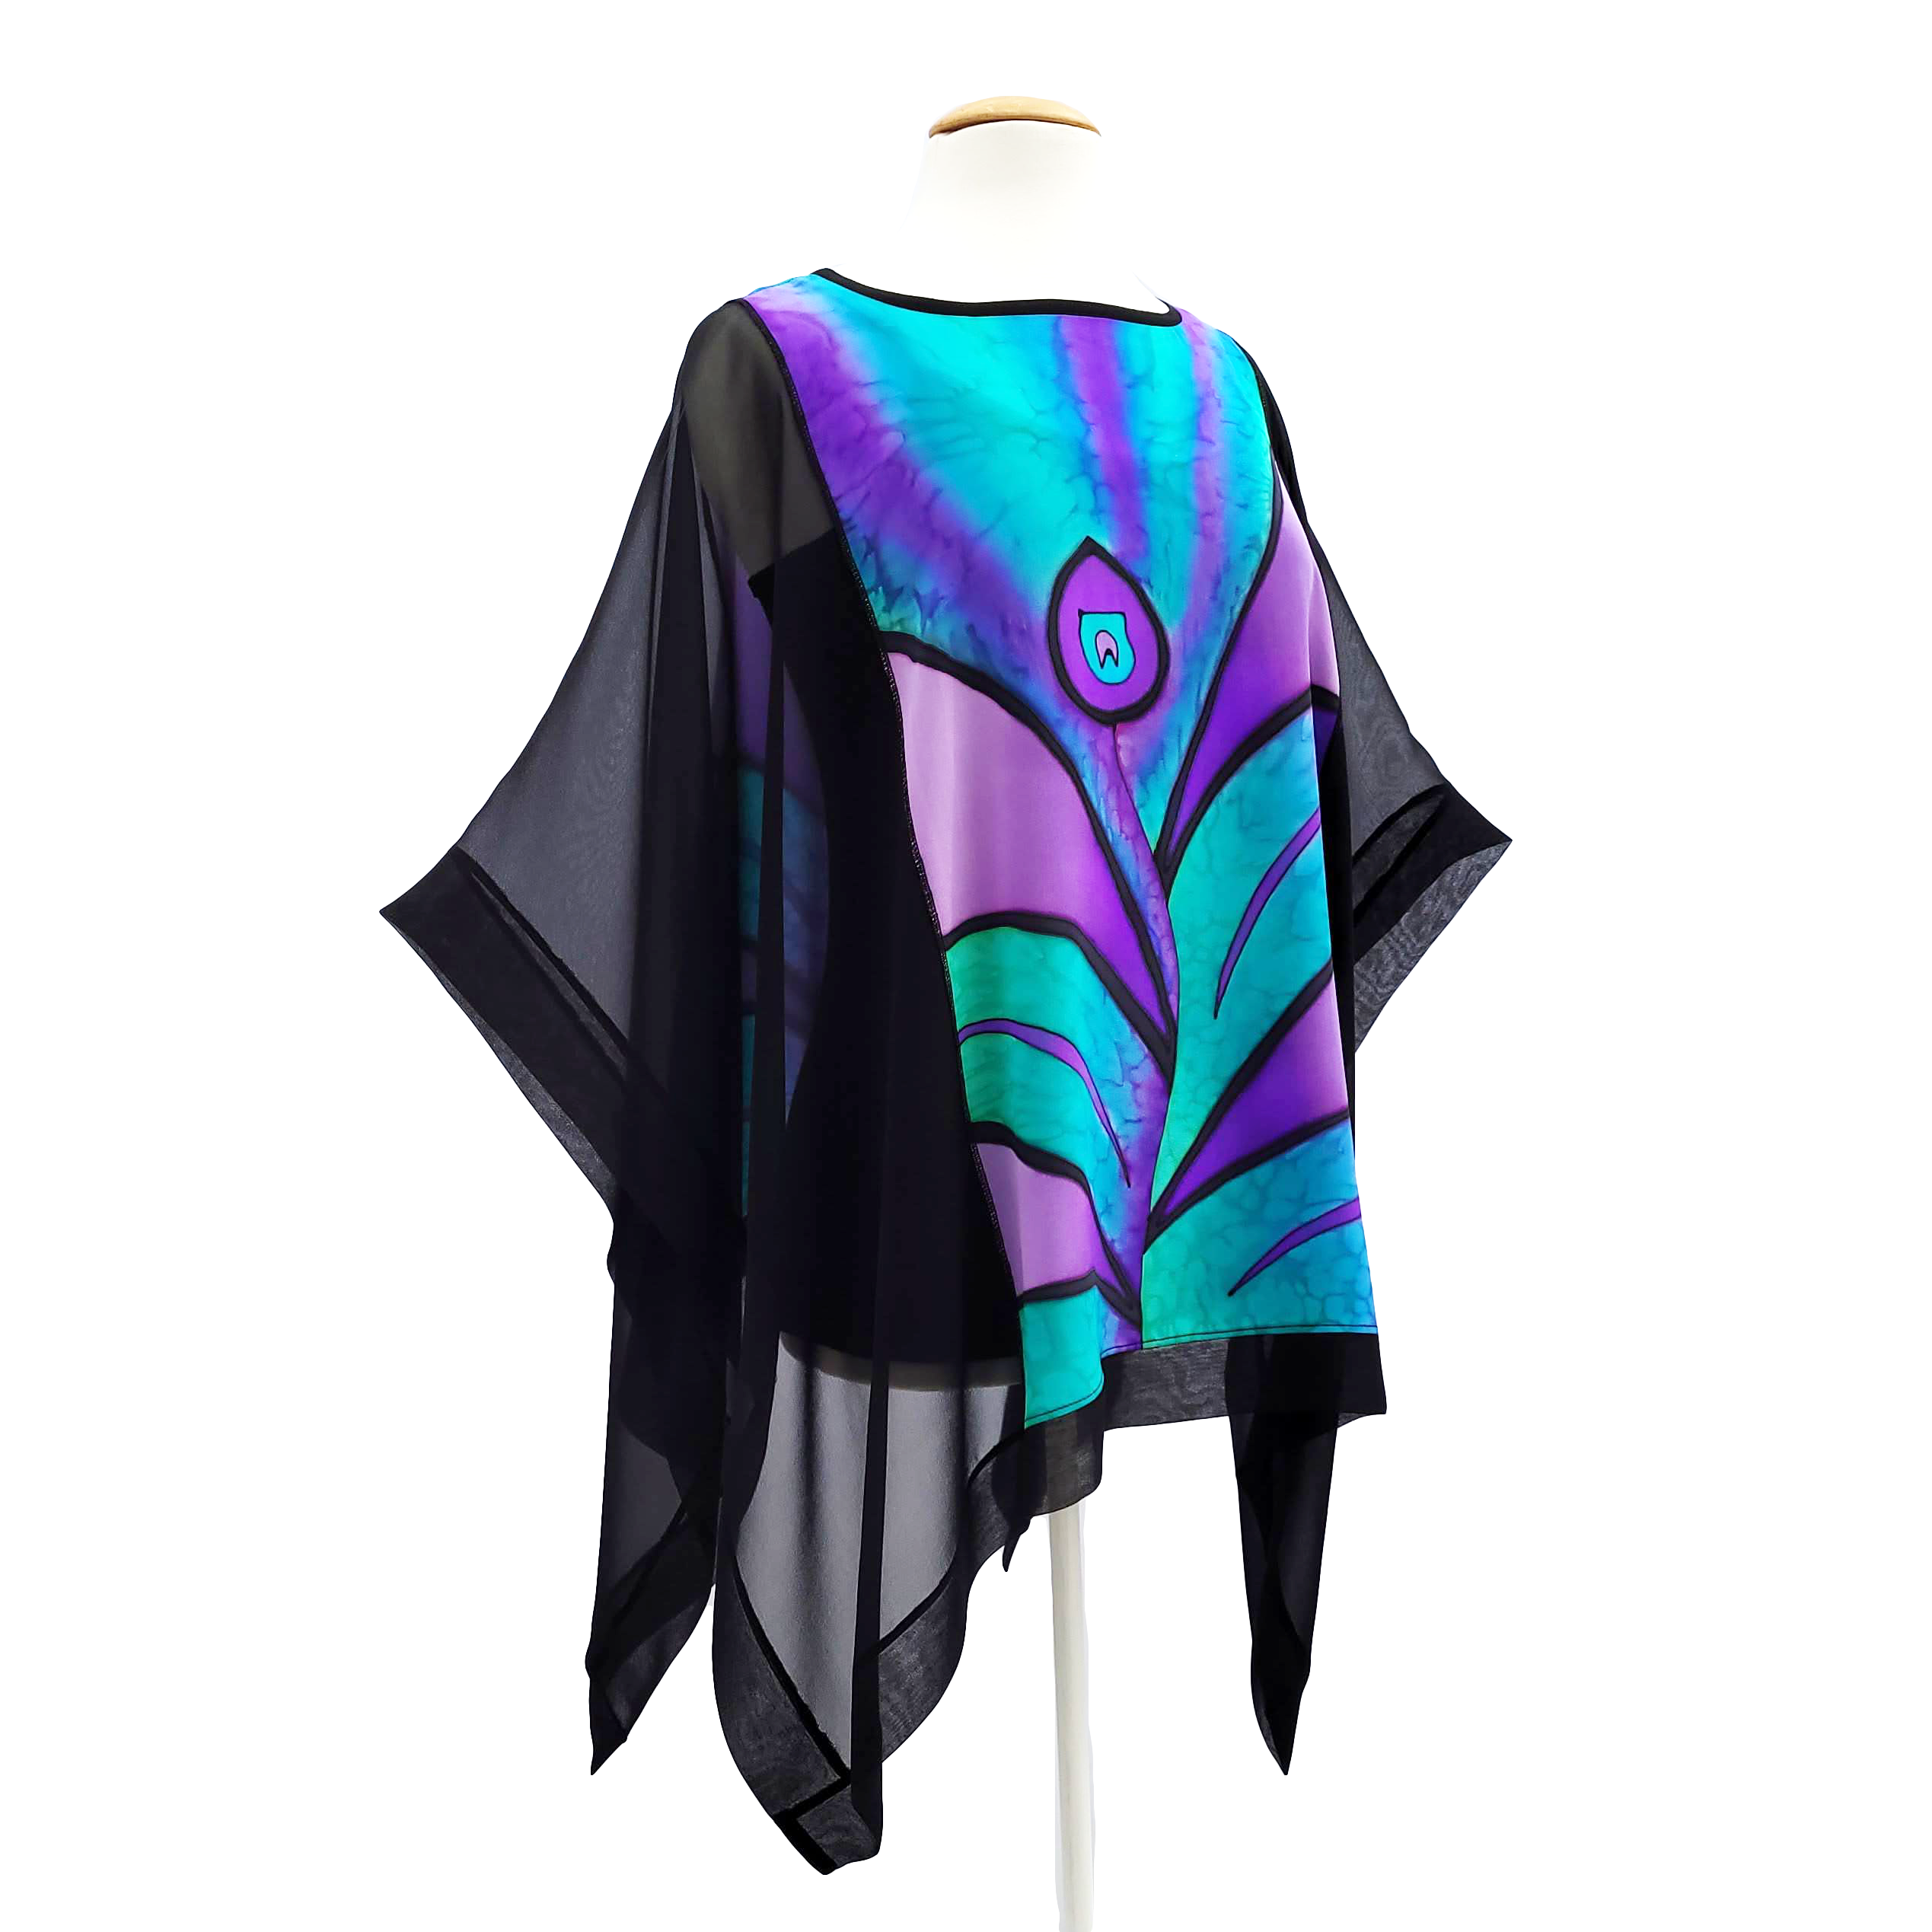 Peacock feather hand painted design art silk clothing poncho top for women handmade by Lynne Kiel